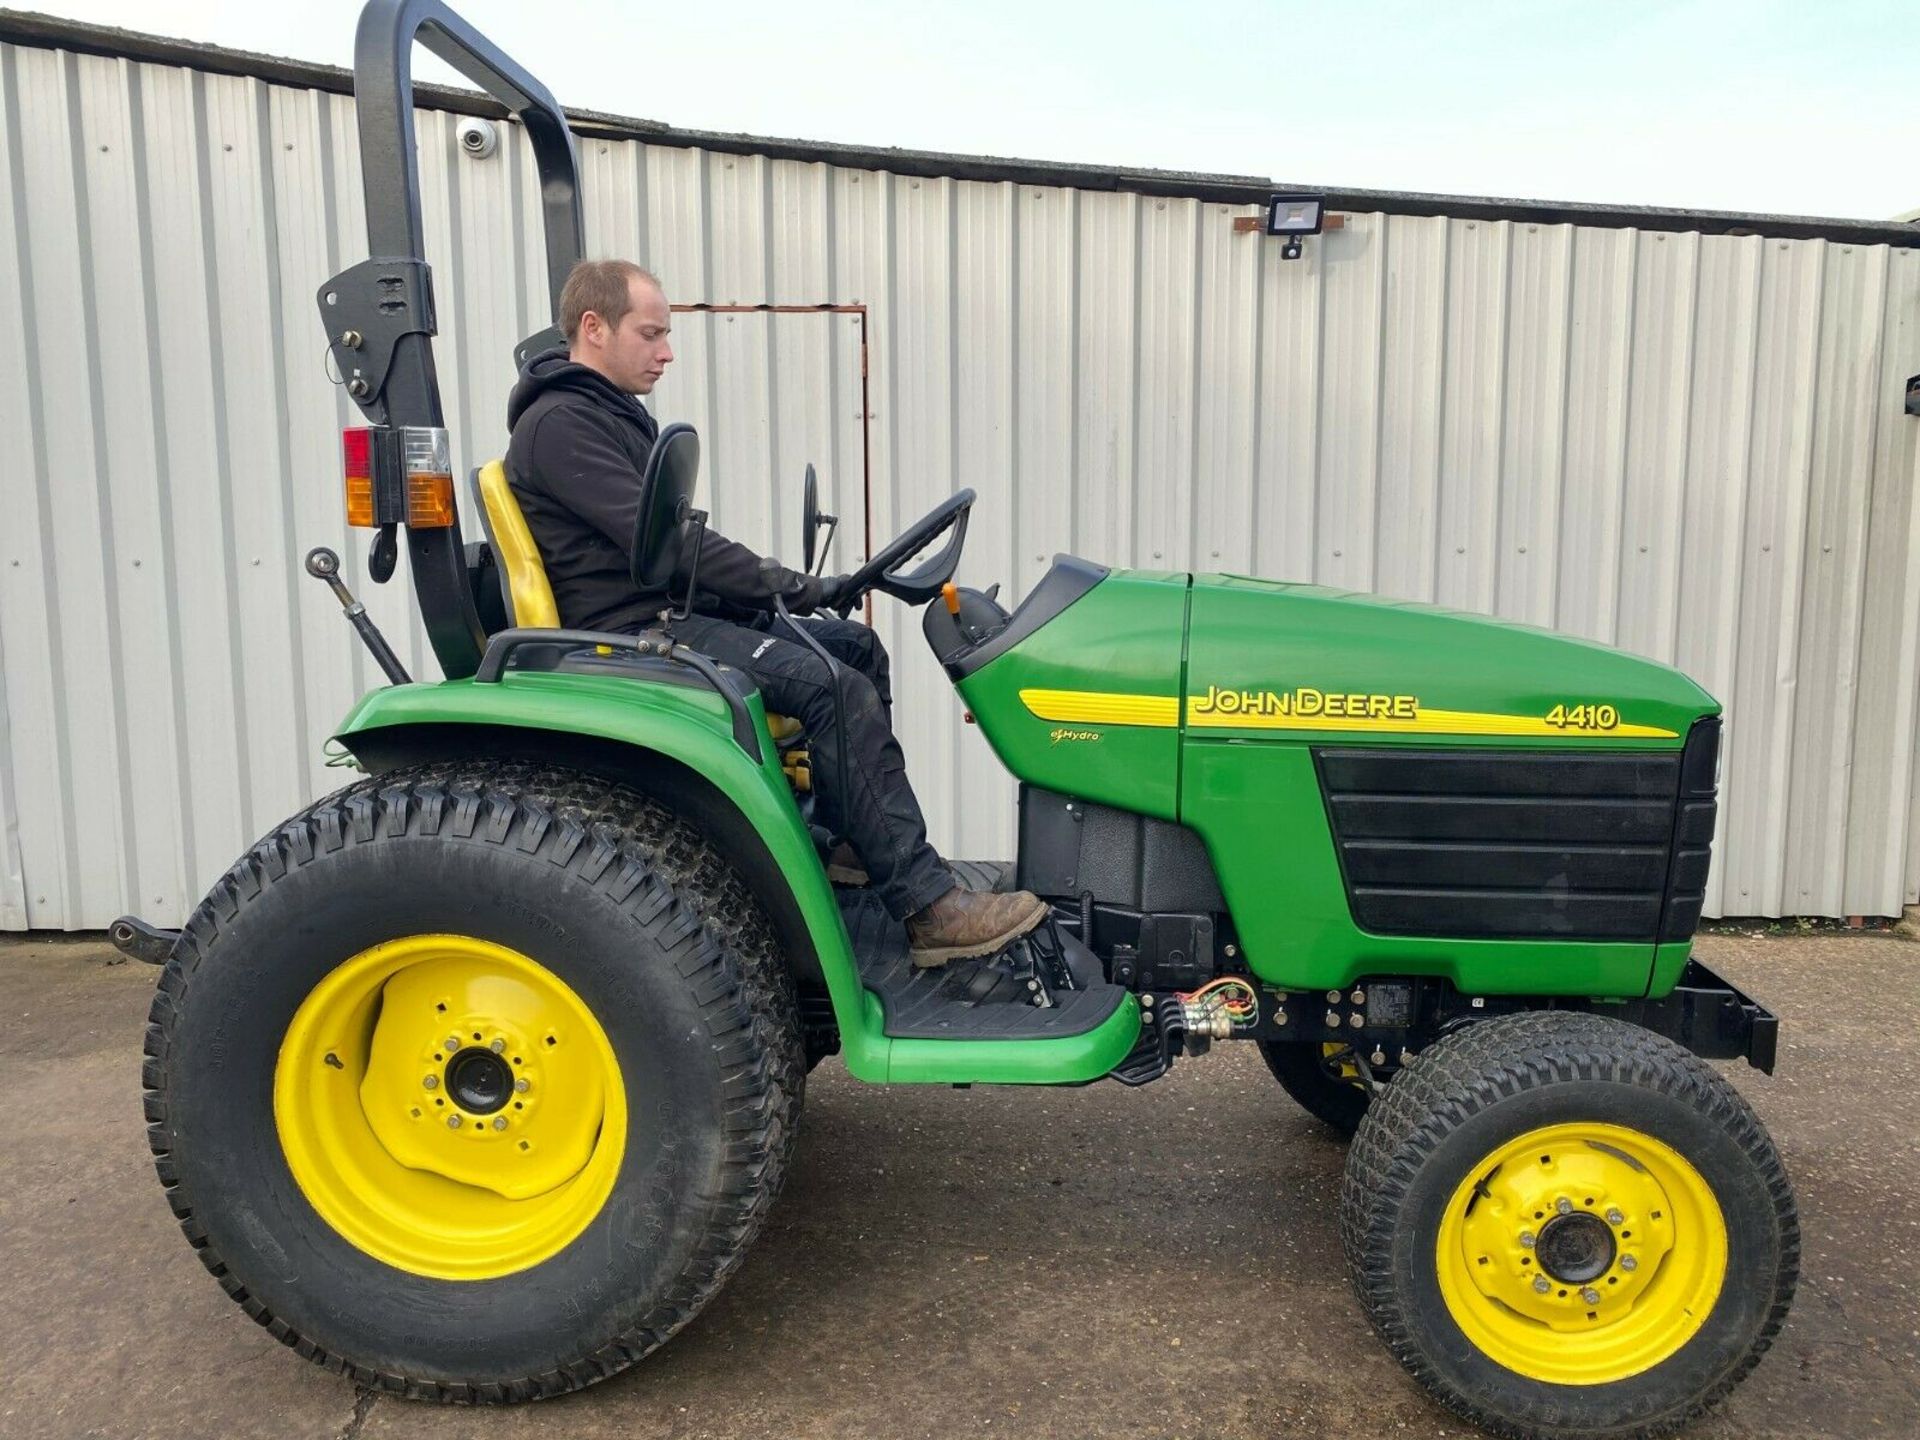 JOHN DEERE COMPACT TRACTOR 4410, 1 OWNER FROM NEW, 4X4, HYDROSTATIC DRIVE *PLUS VAT* - Image 7 of 8